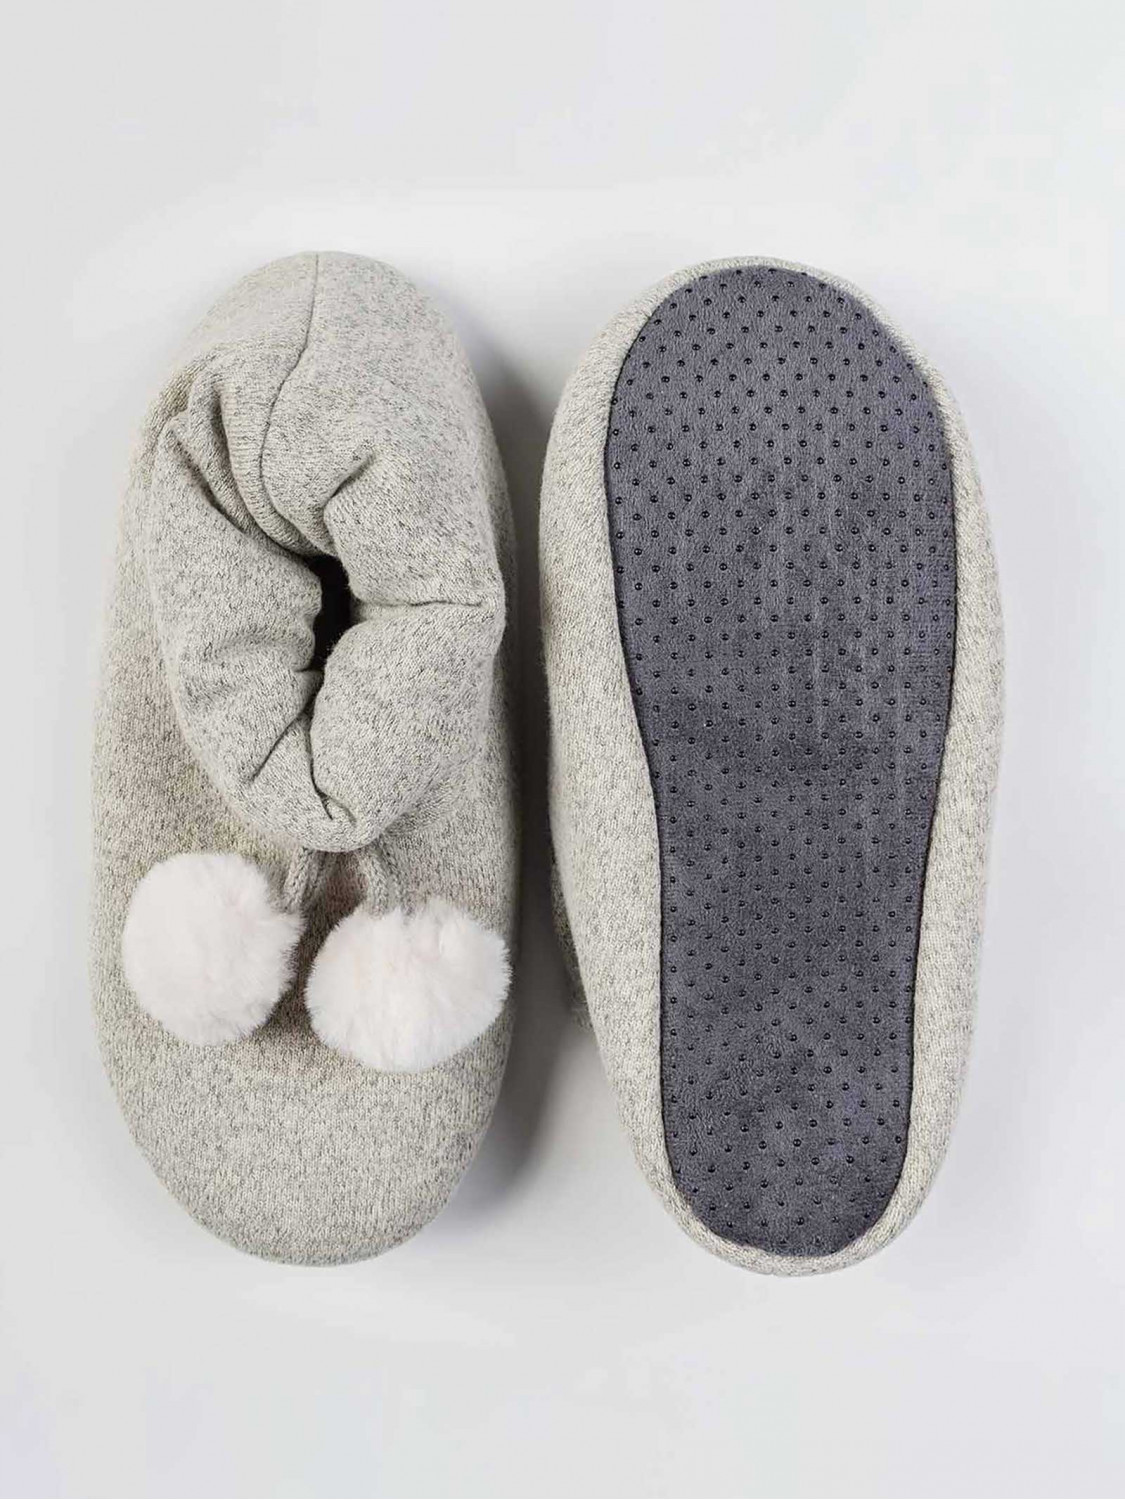 Lapel slippers with pom poms